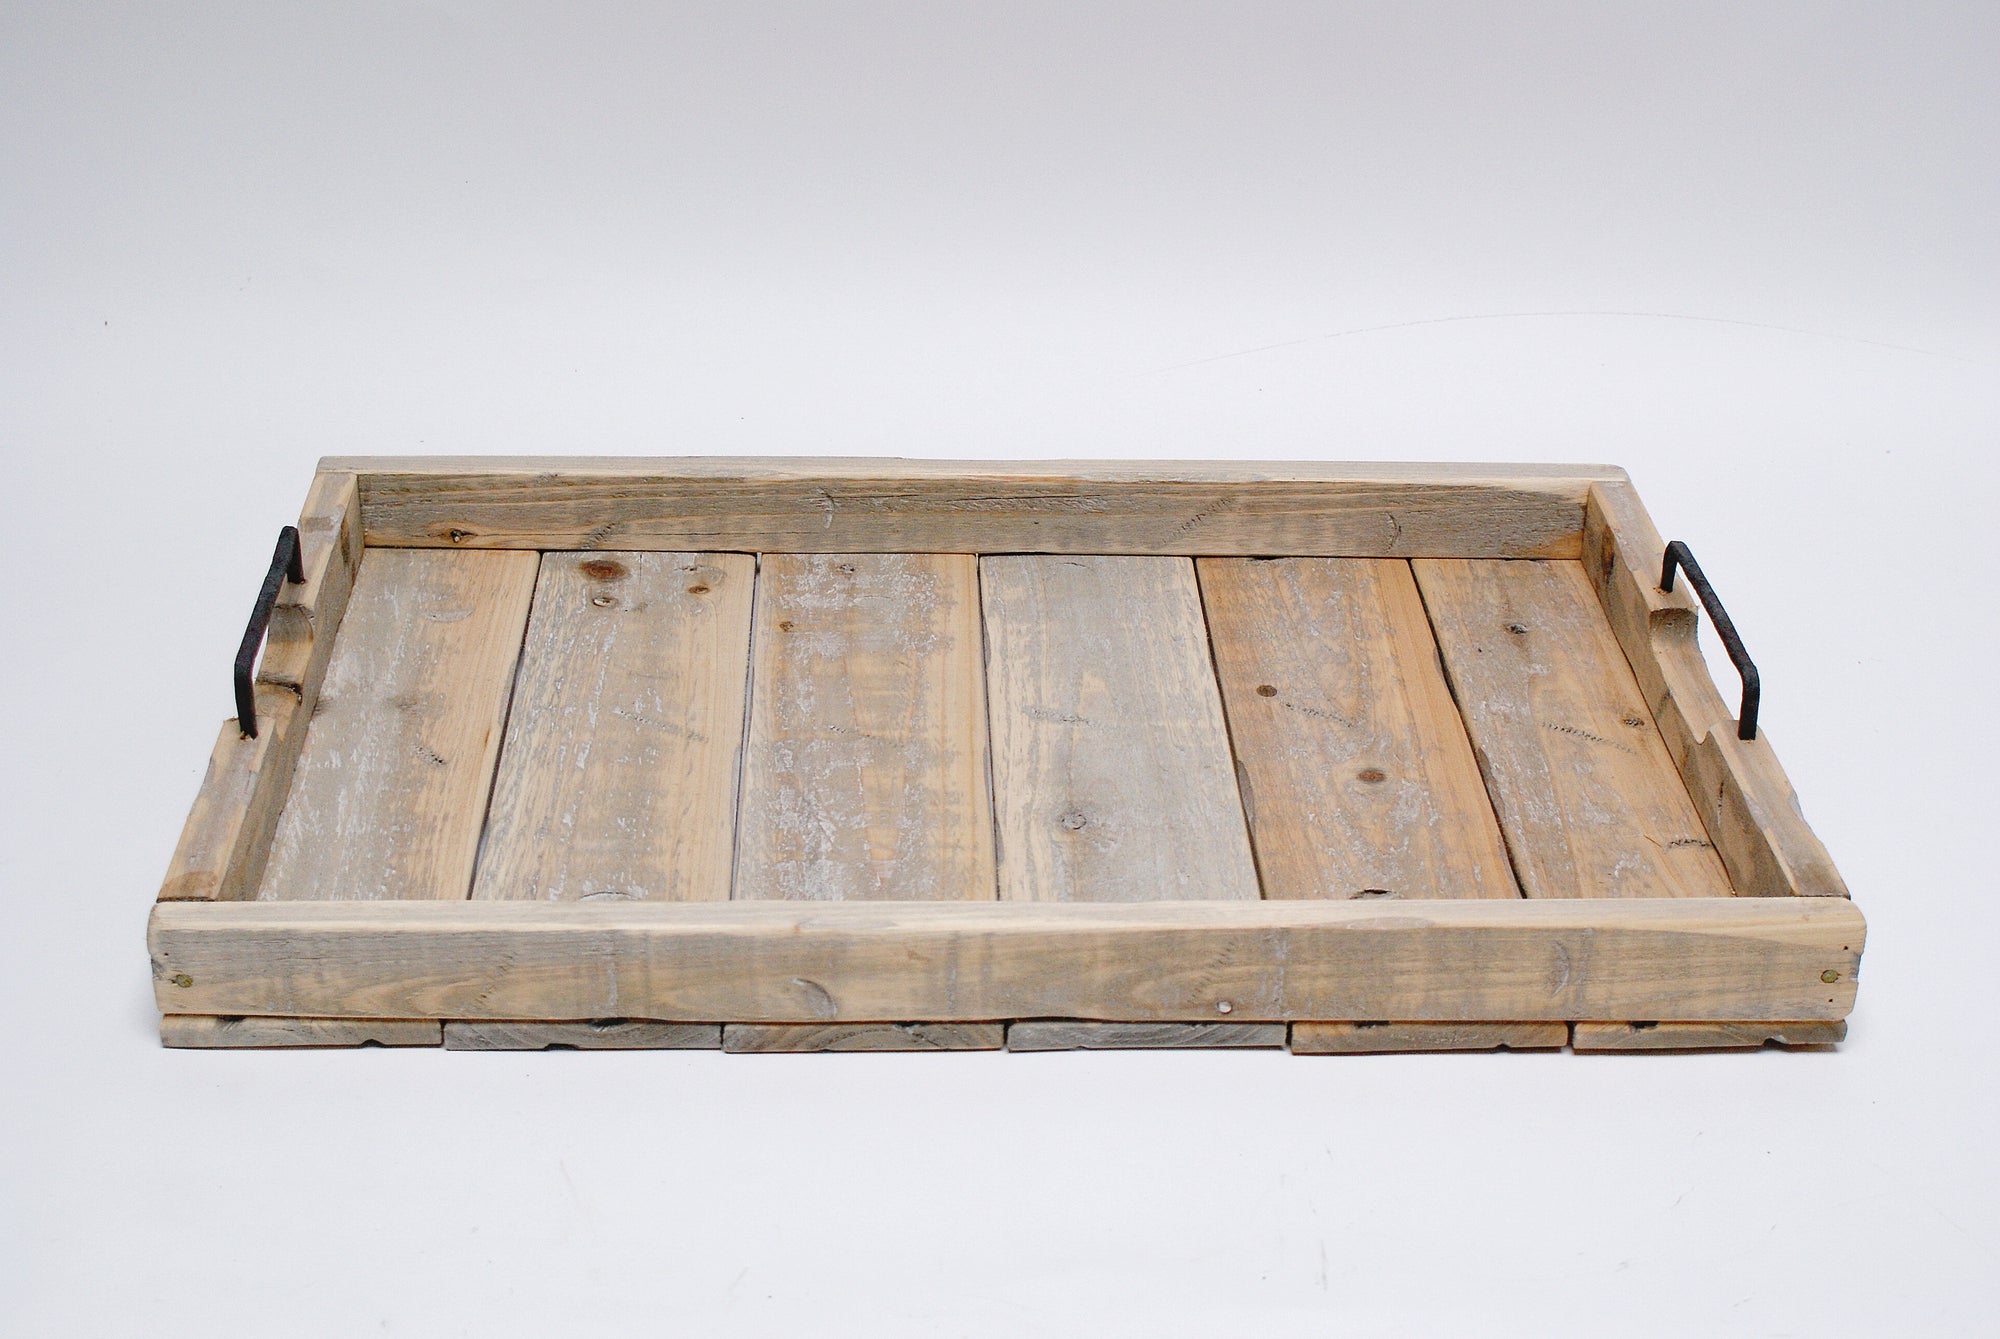 16x24 Rectangular Wood Serving Tray With Metal Handles Brown